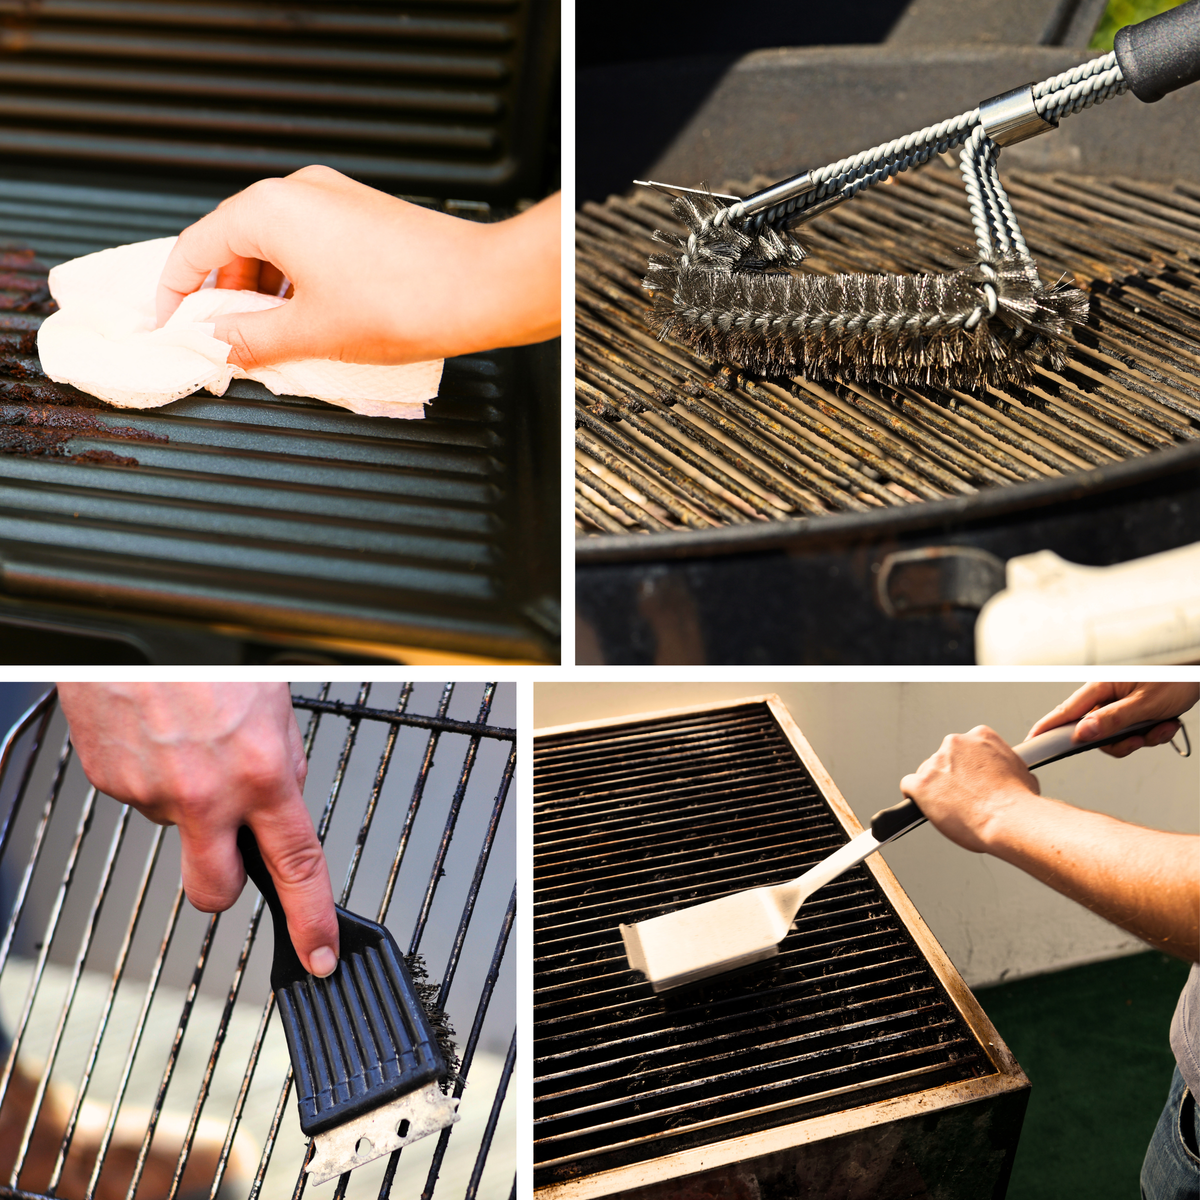 $ Pictures of people cleaning grill grates with different brushes and tools